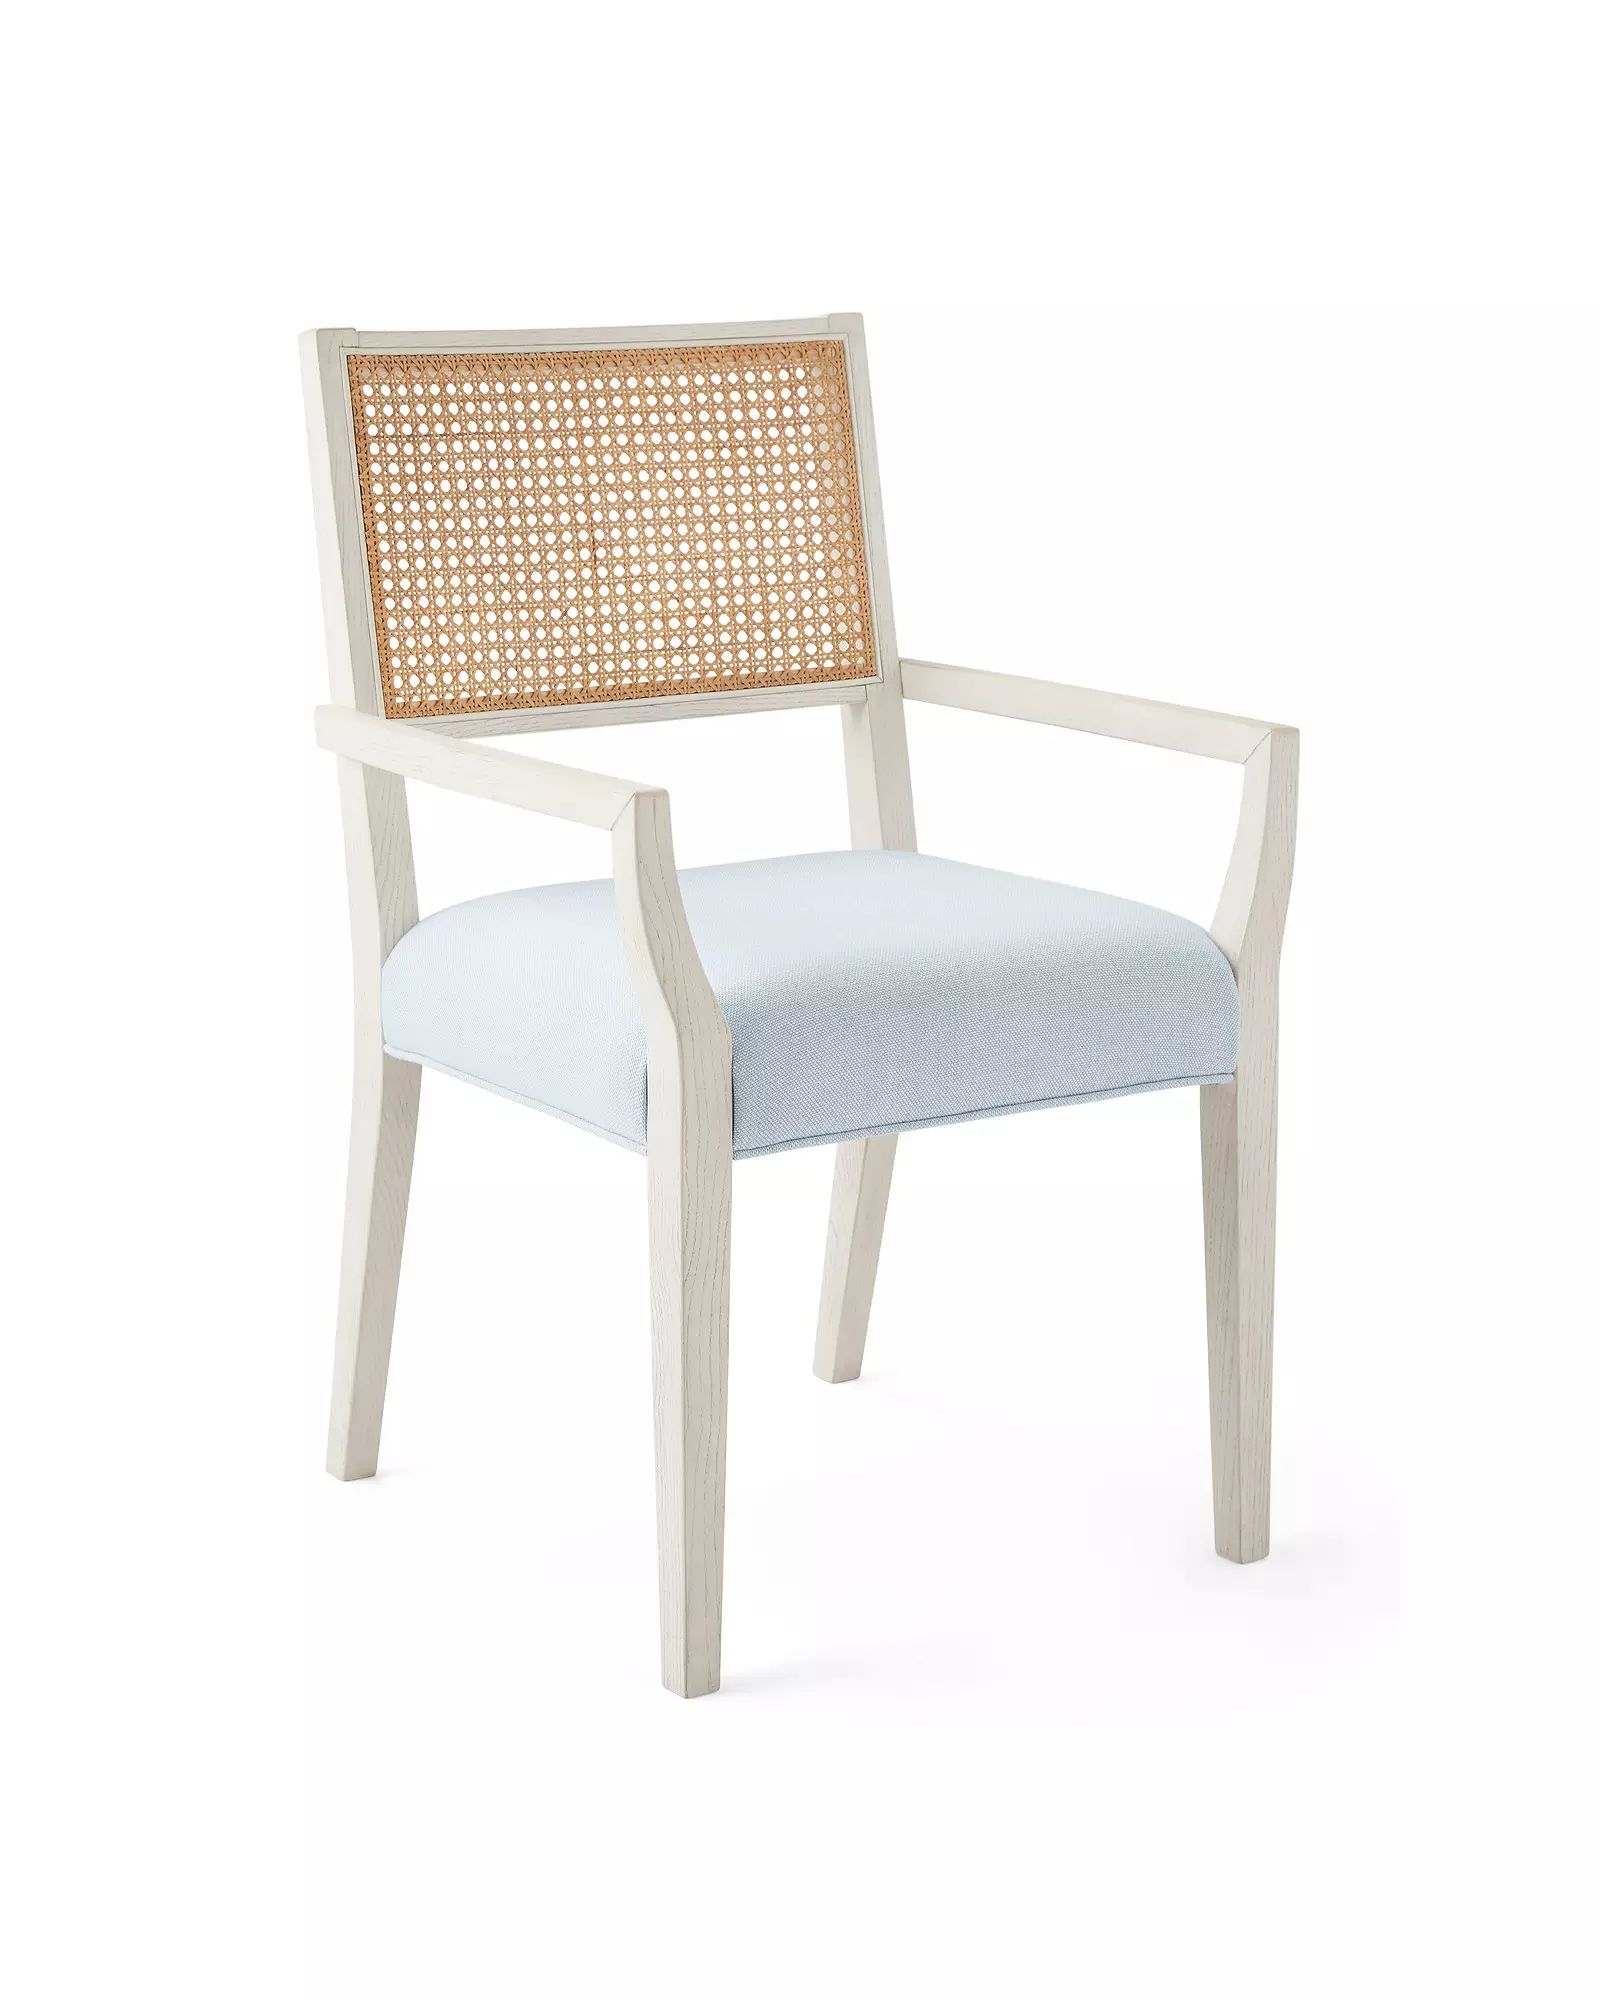 Wells Dining Chair | Serena and Lily